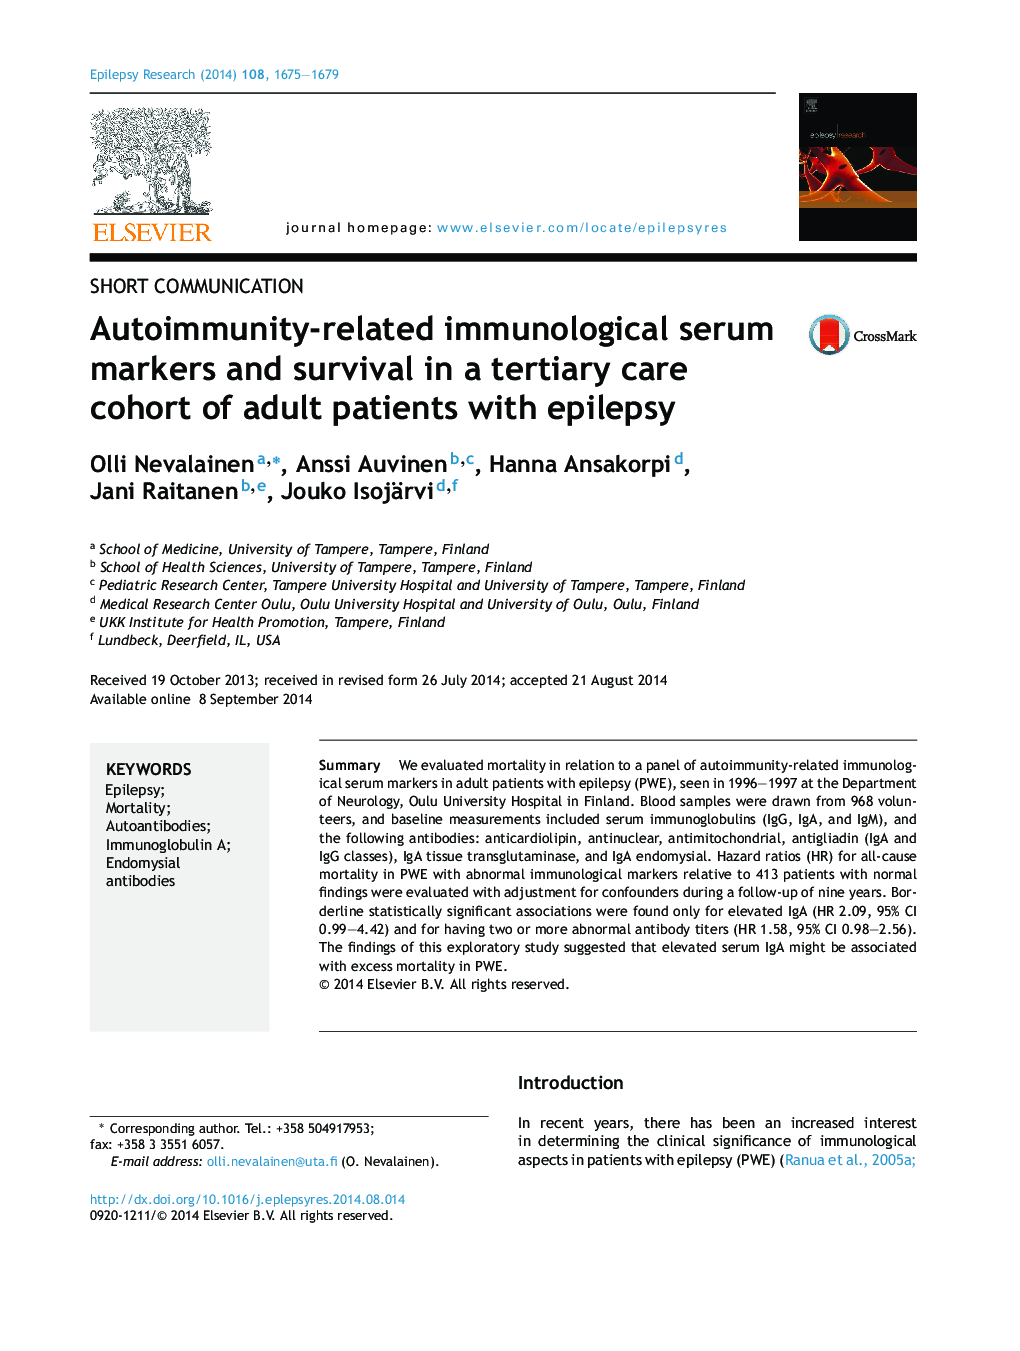 Autoimmunity-related immunological serum markers and survival in a tertiary care cohort of adult patients with epilepsy